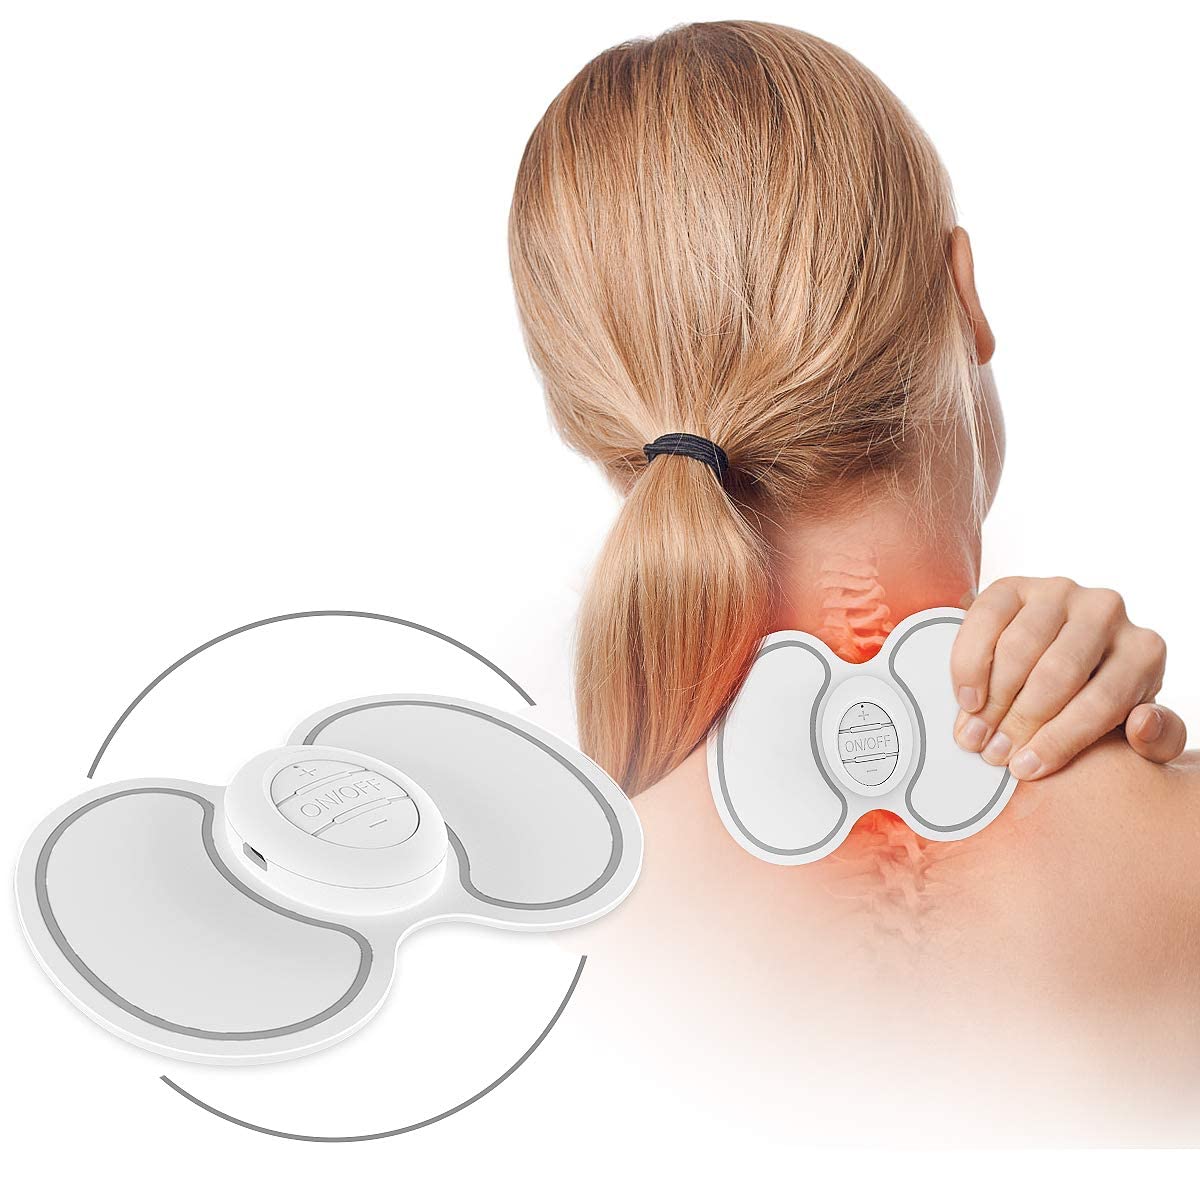 OSITO Neck Massager FSA HSA Approved Eligible Items, Neck Massager for Pain  Relief Deep Tissue with …See more OSITO Neck Massager FSA HSA Approved